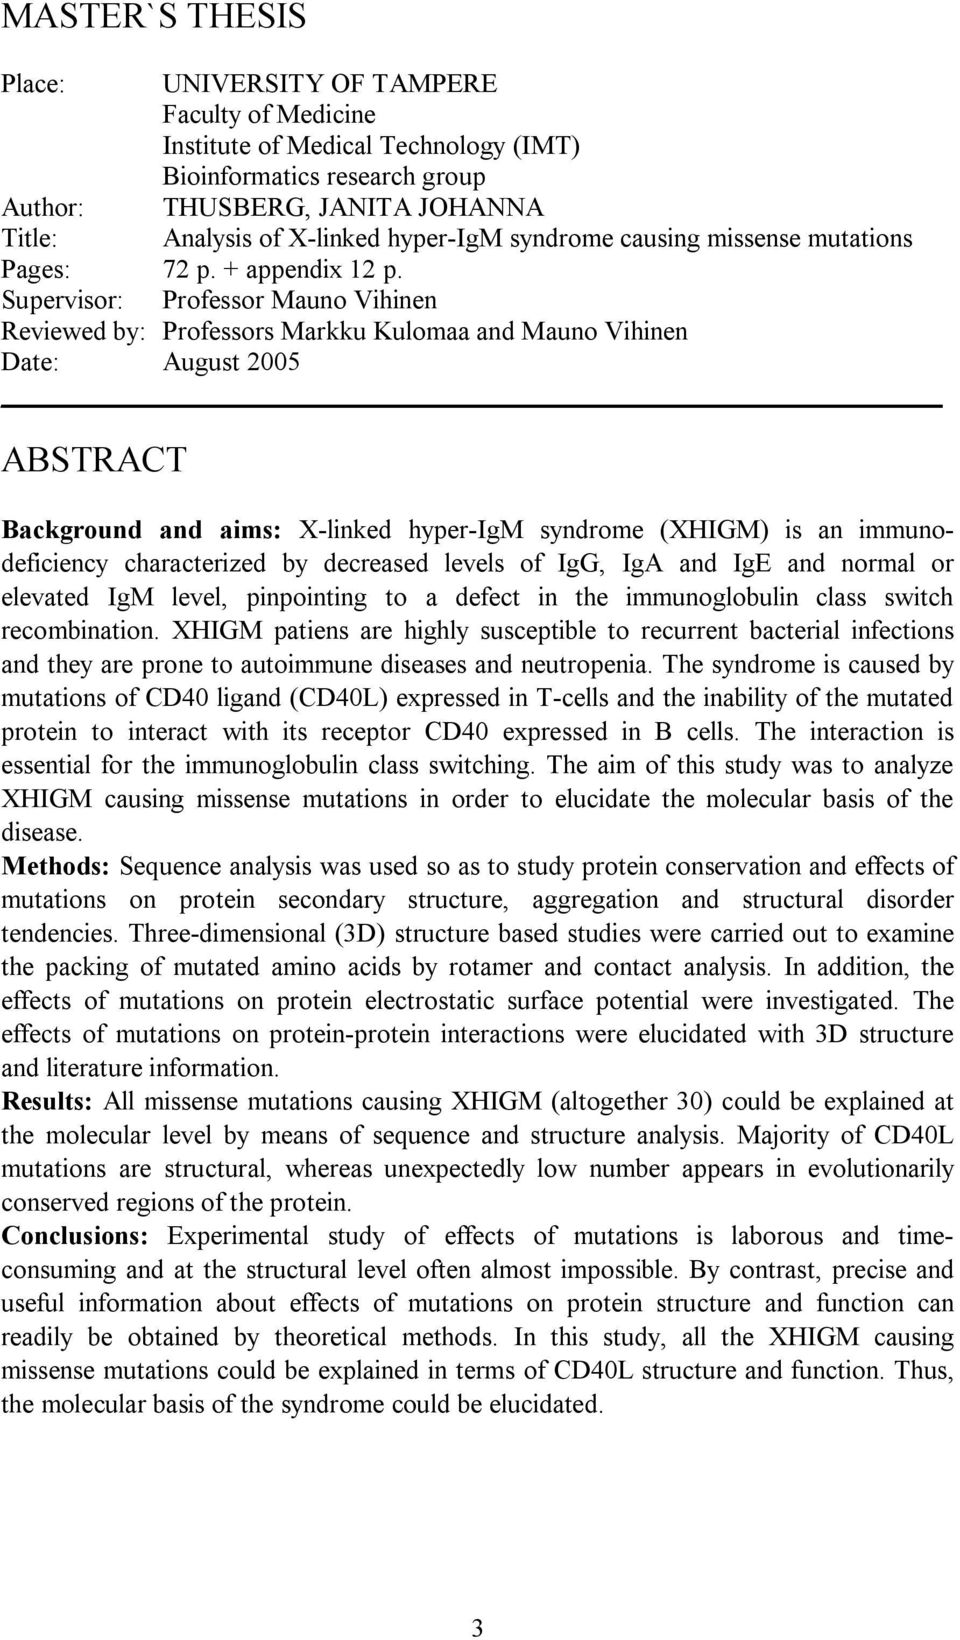 Supervisor: Professor Mauno Vihinen Reviewed by: Professors Markku Kulomaa and Mauno Vihinen Date: August 2005 ABSTRACT Background and aims: X linked hyper IgM syndrome (XHIGM) is an immunodeficiency